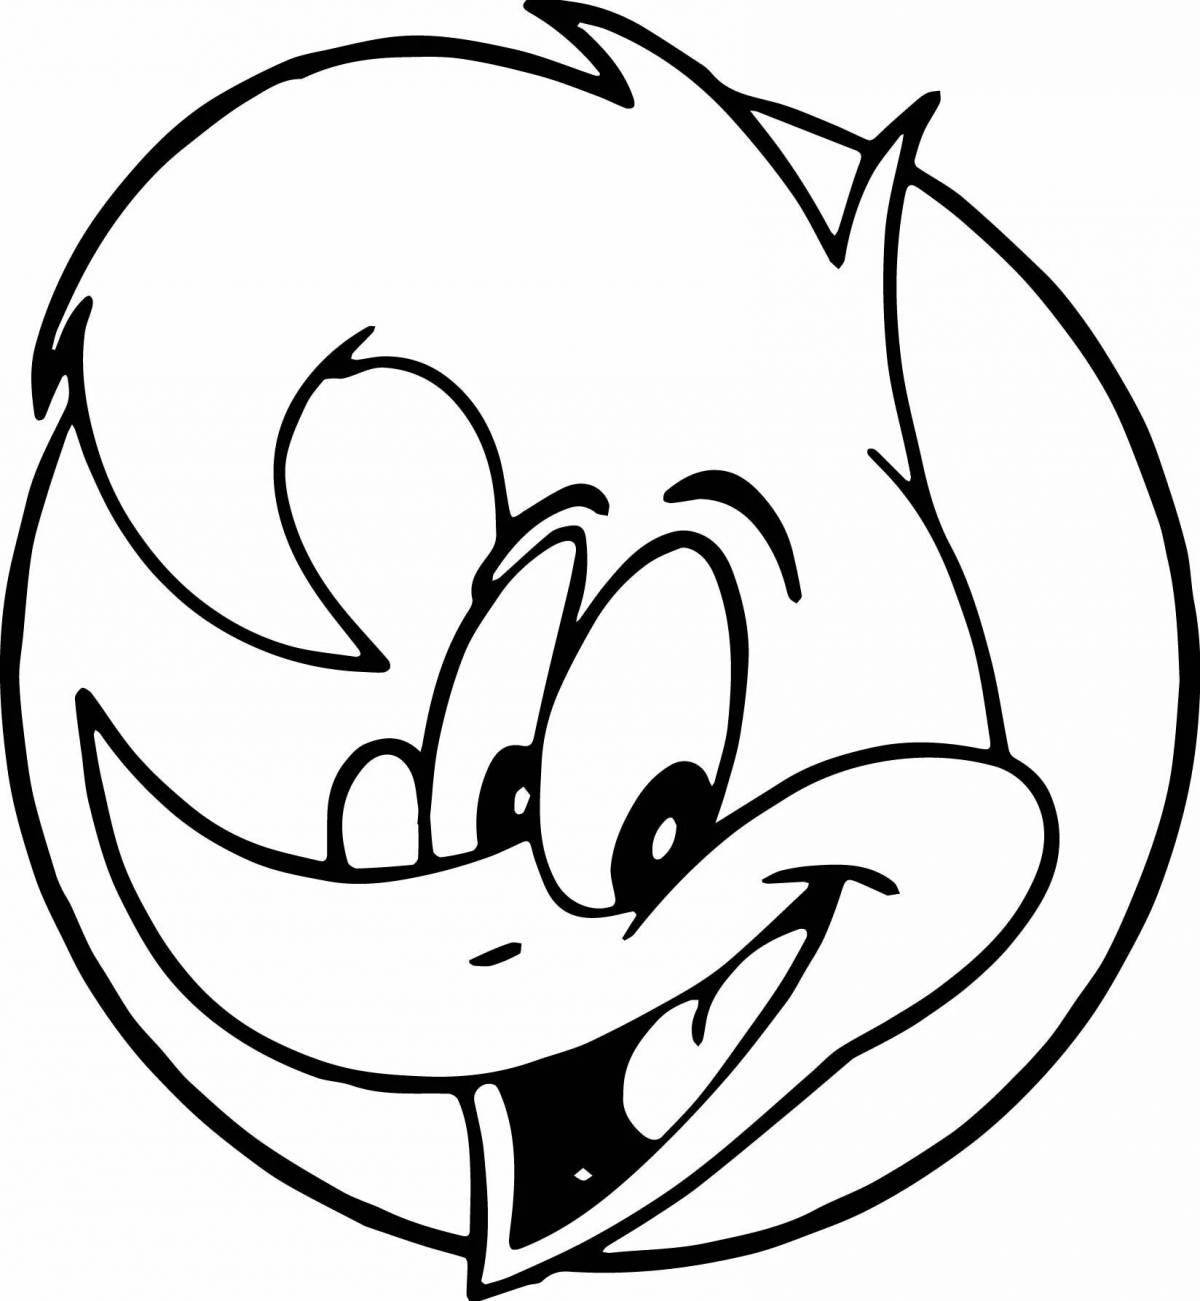 Coloring book playful woody woodpecker